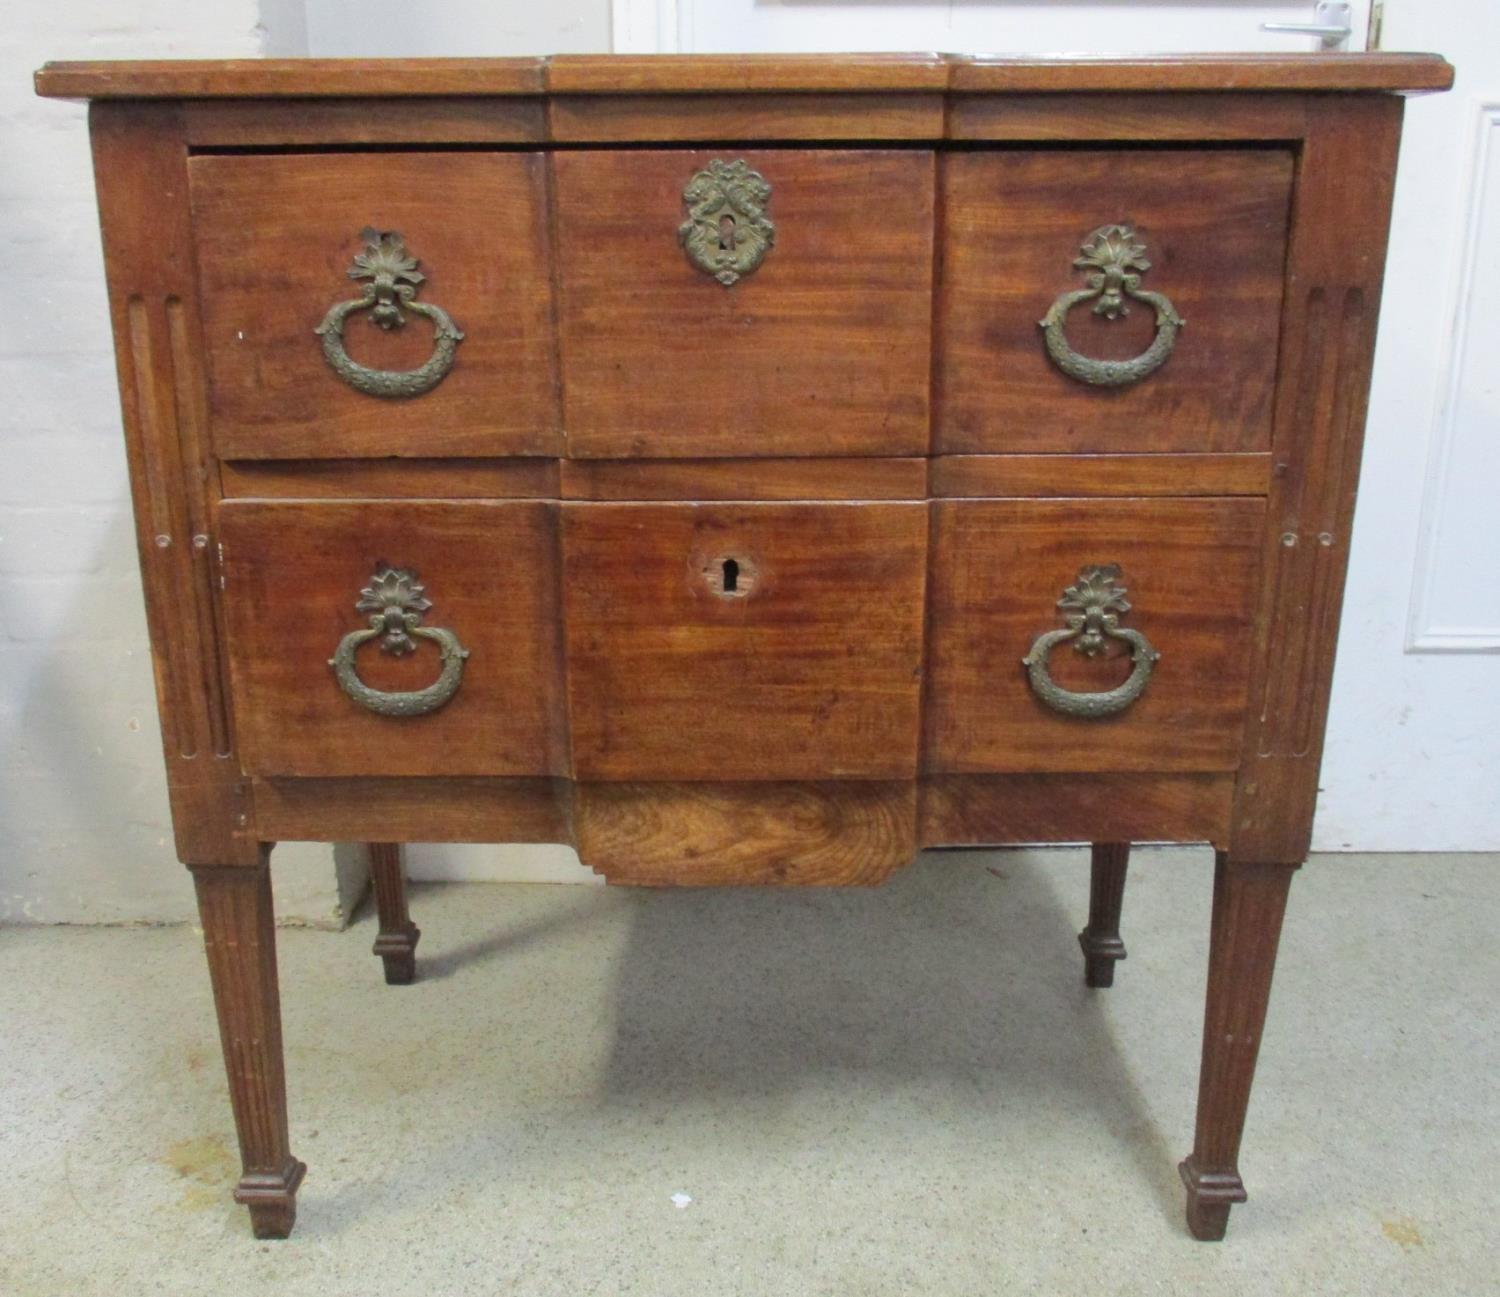 An early 20th century French transitional style commode, of small proportion, with two horizontal